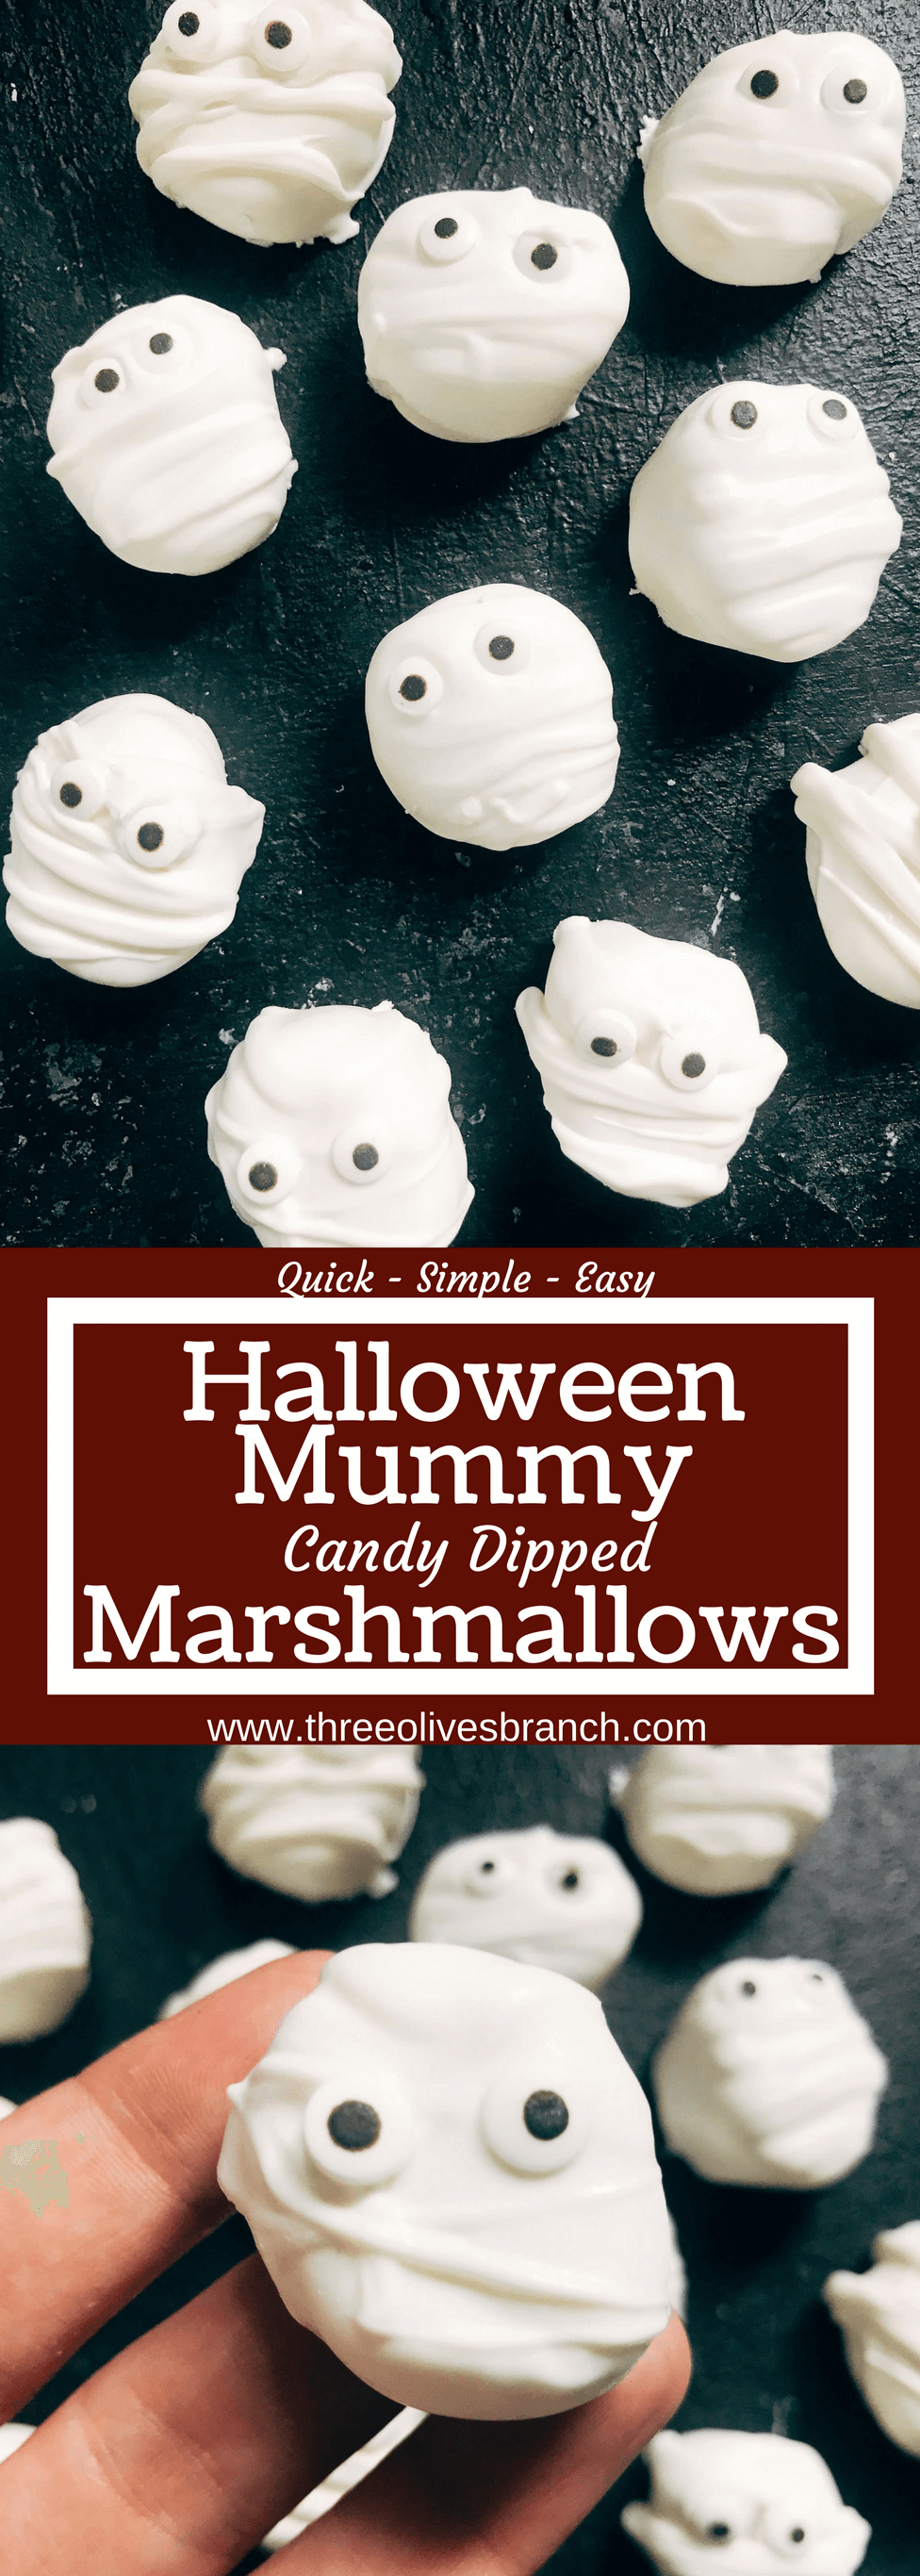 Halloween Mummy Candy Dipped Marshmallows - Three Olives Branch